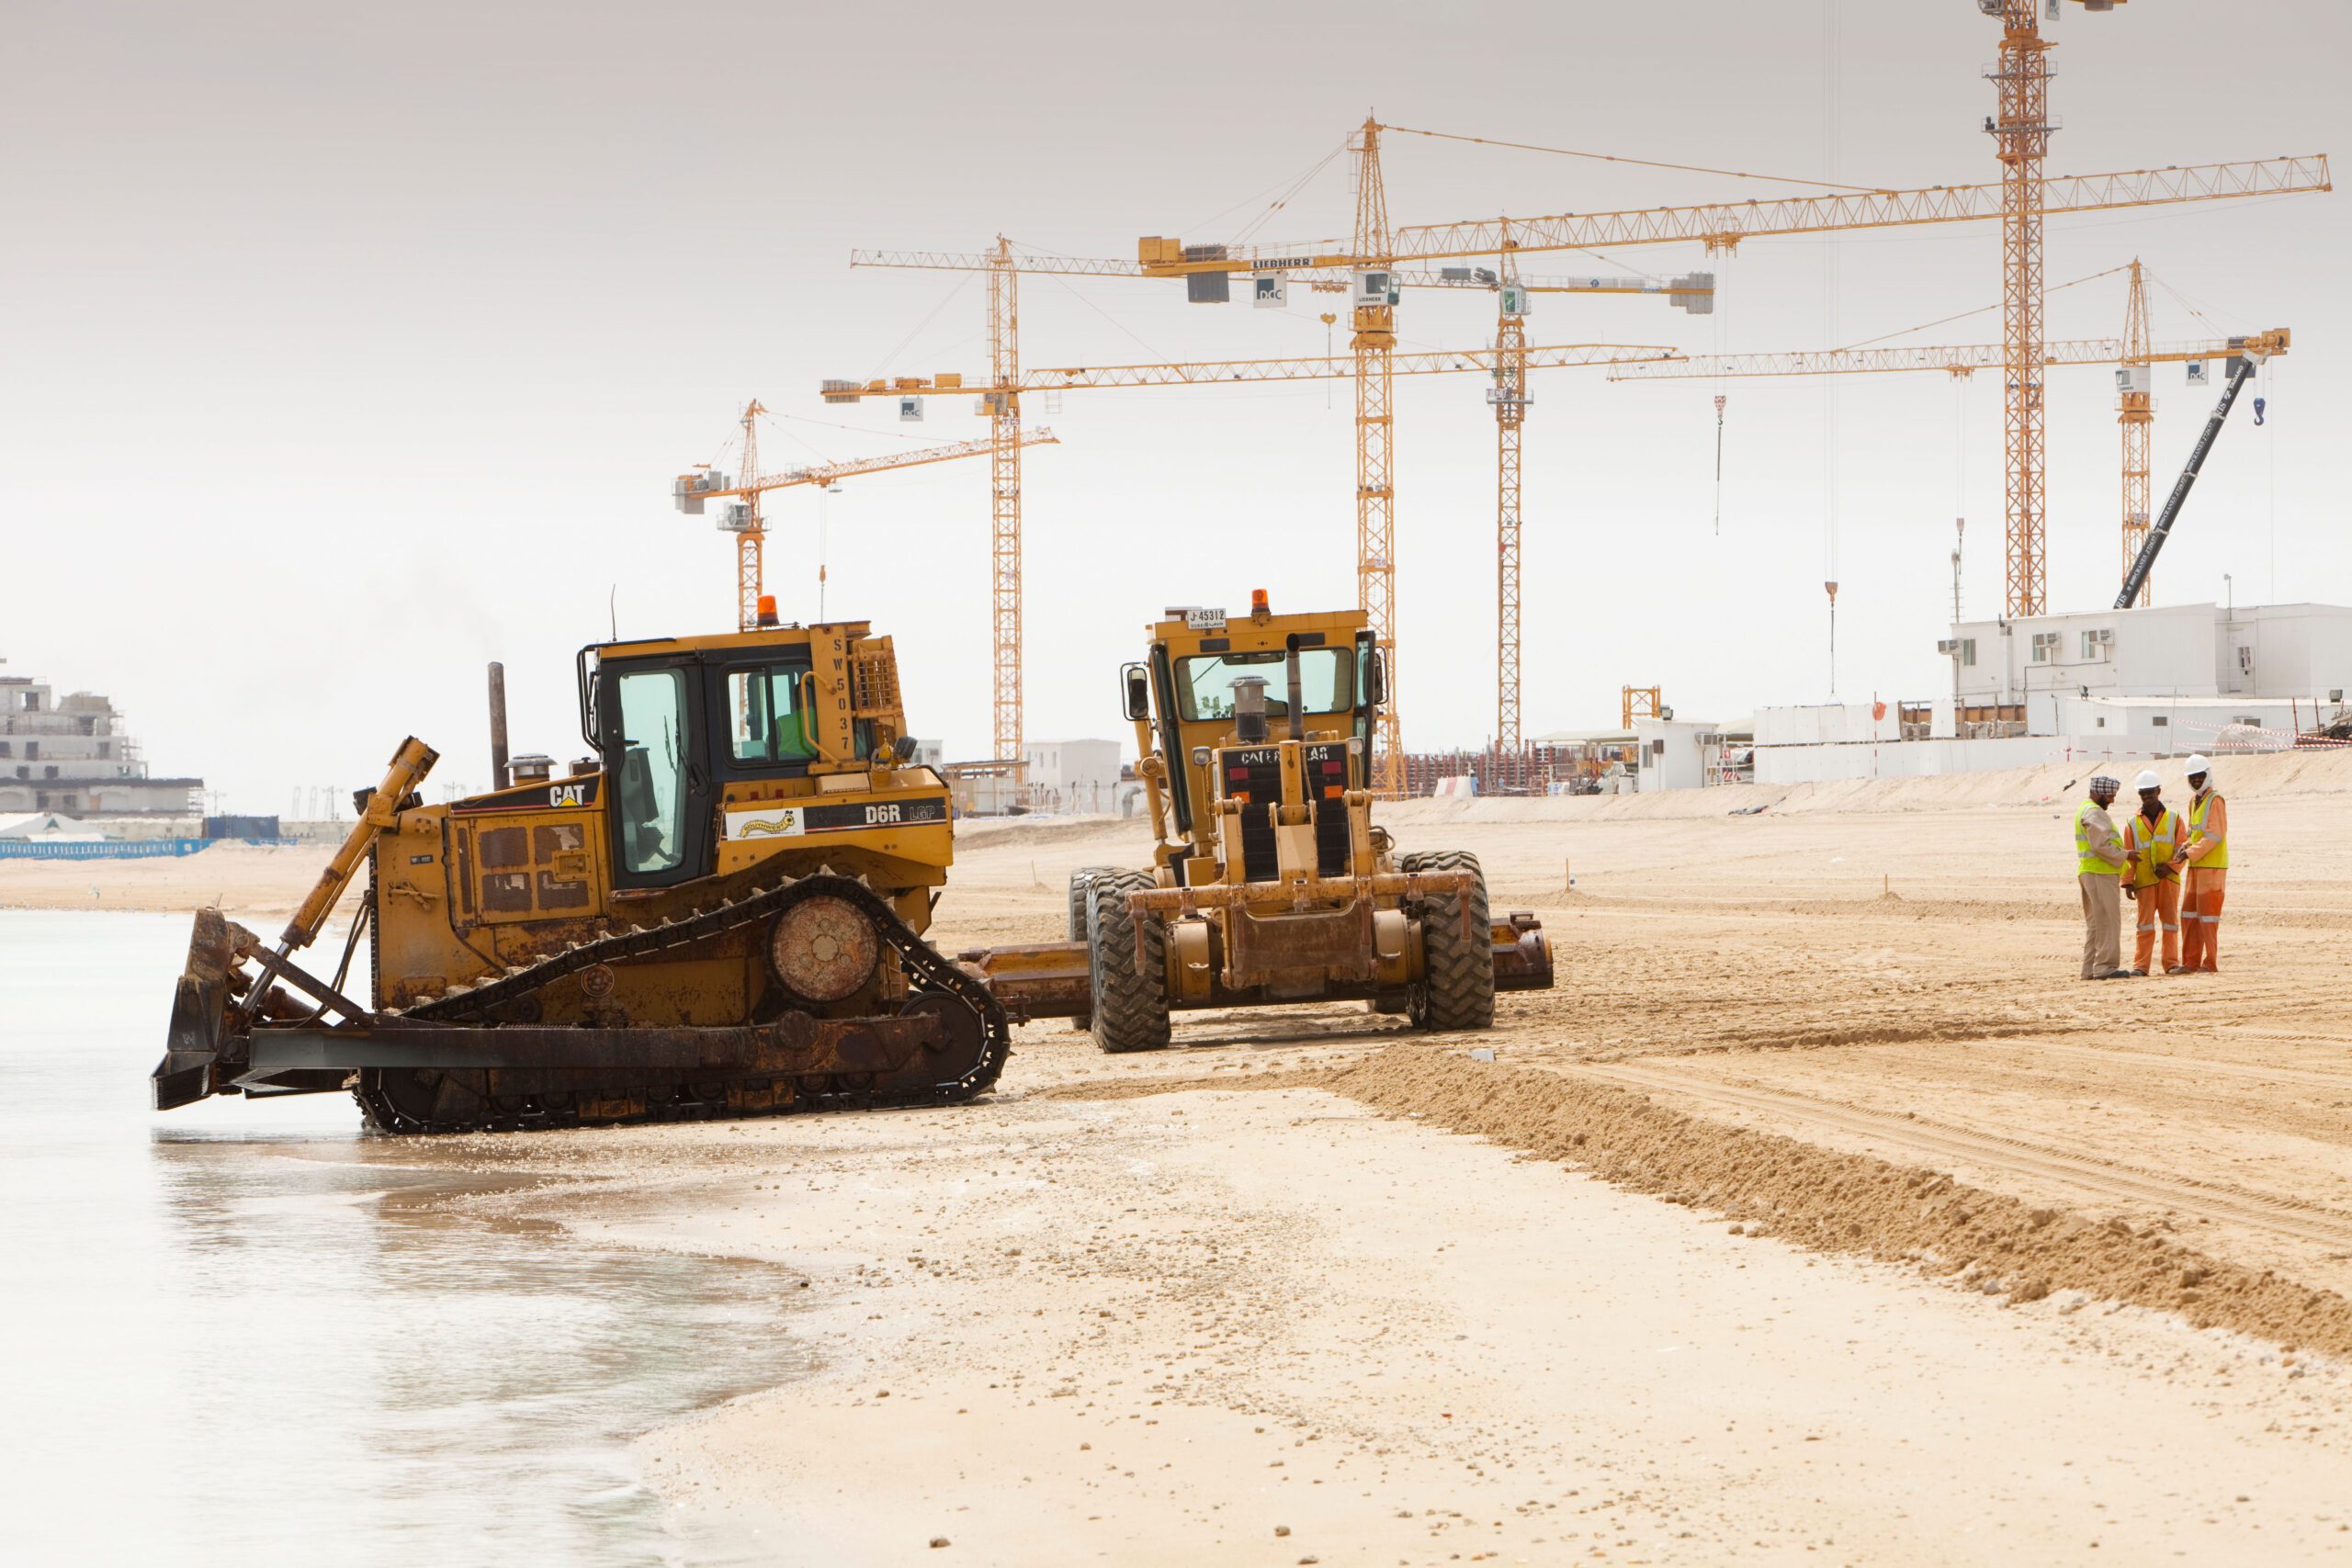 Construction is one of the sectors most affected by the issue of late payments in the UAE